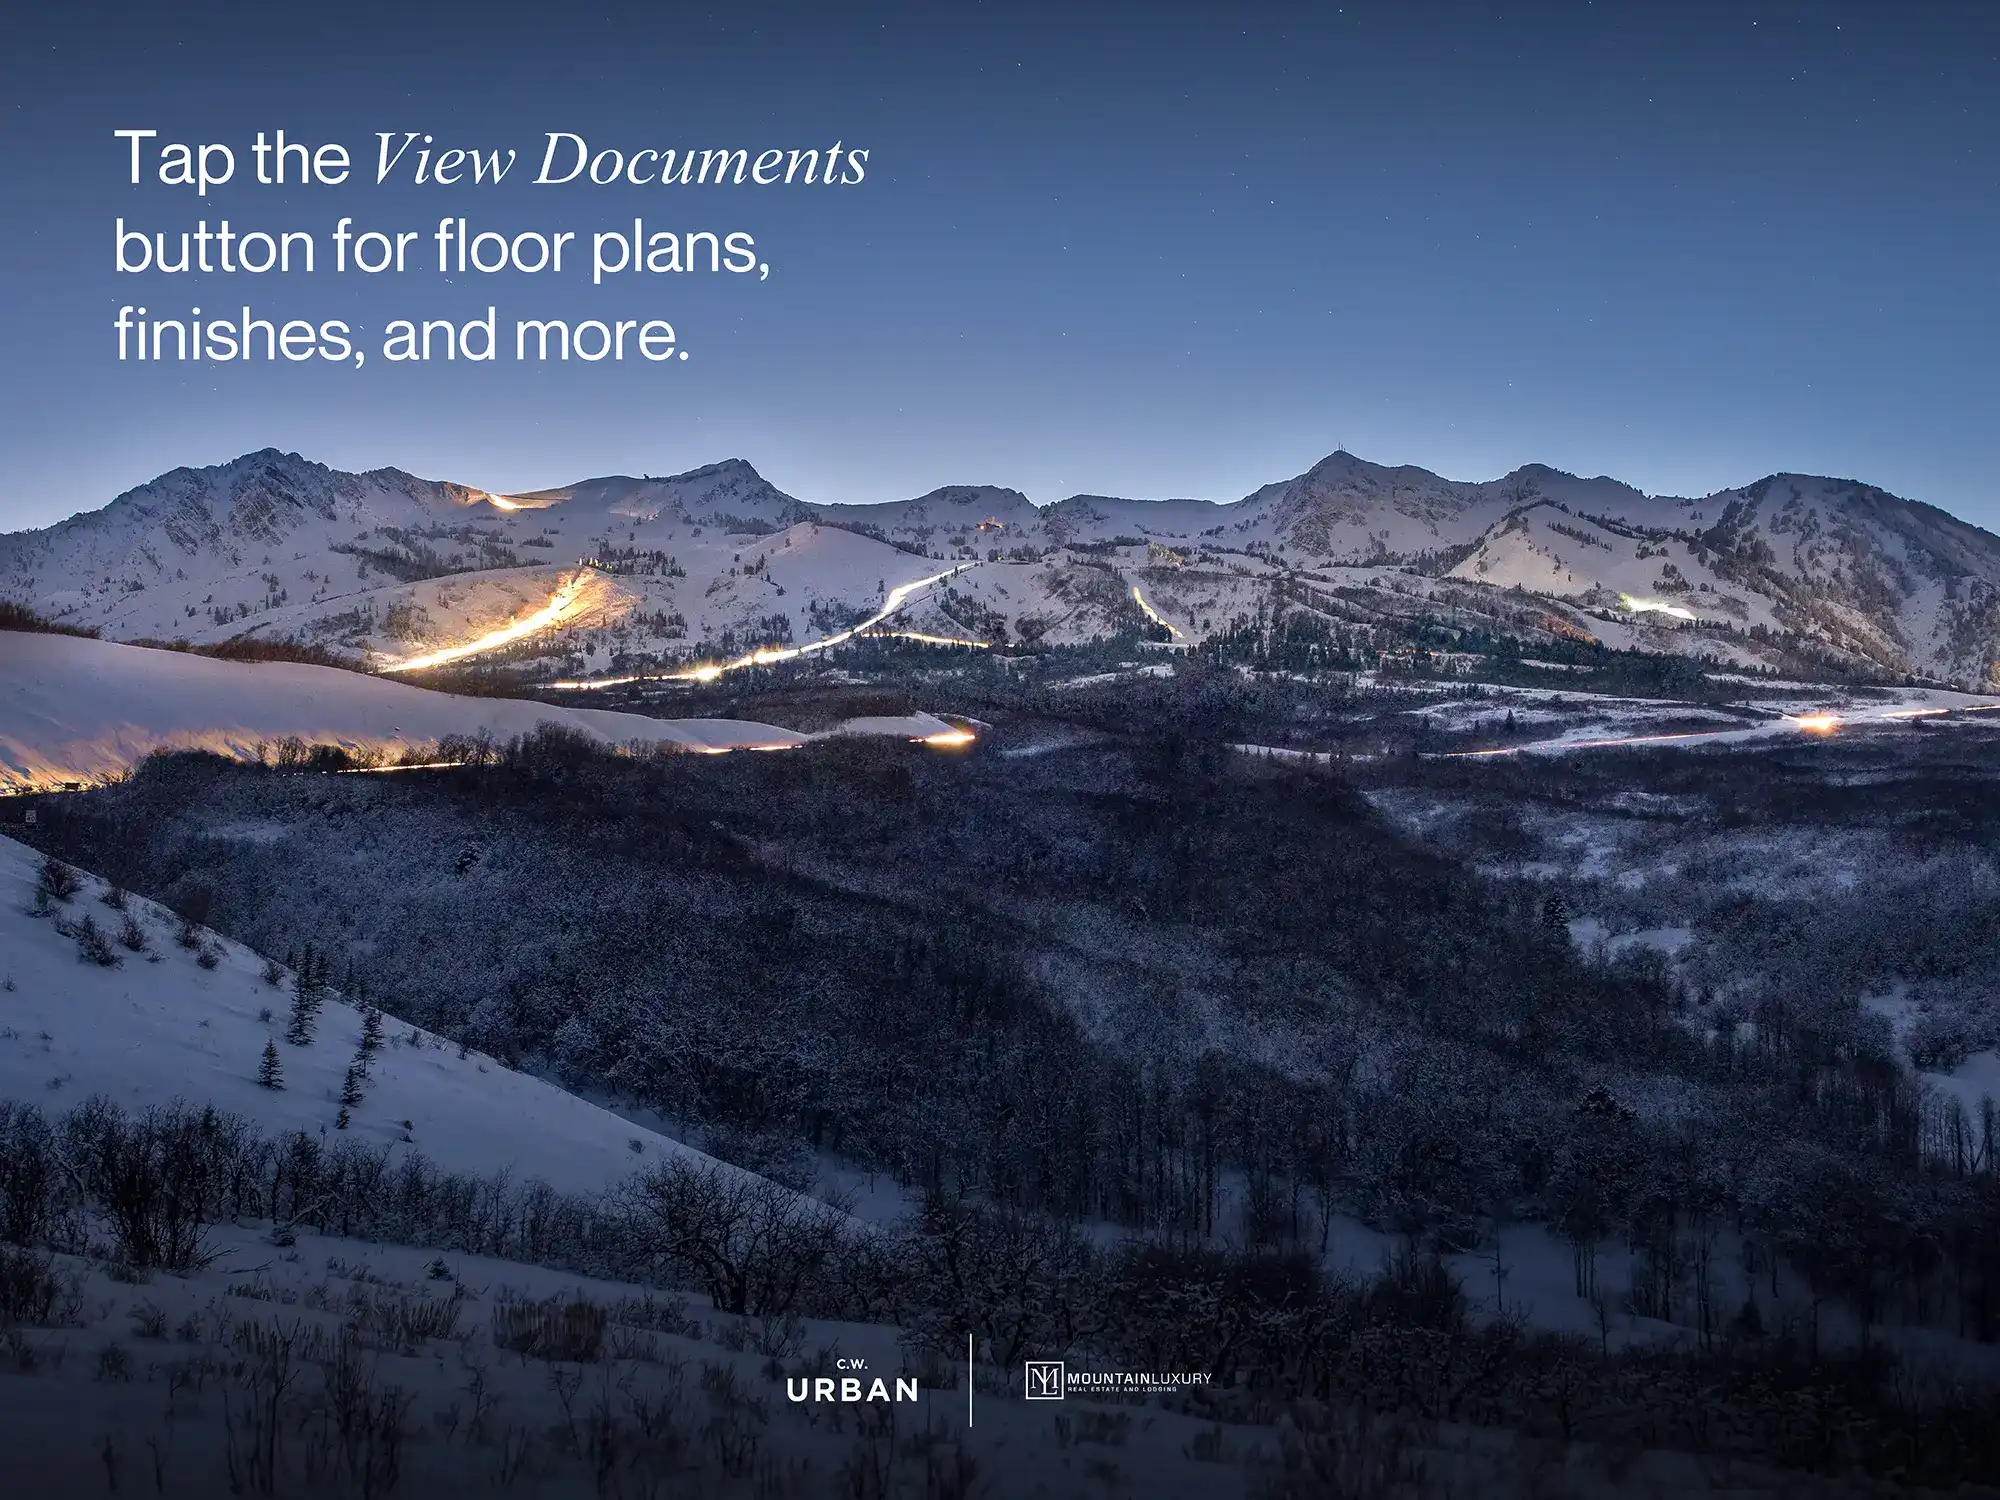 Tap the view documents button for theBasin's floor plans, finishes, and more.